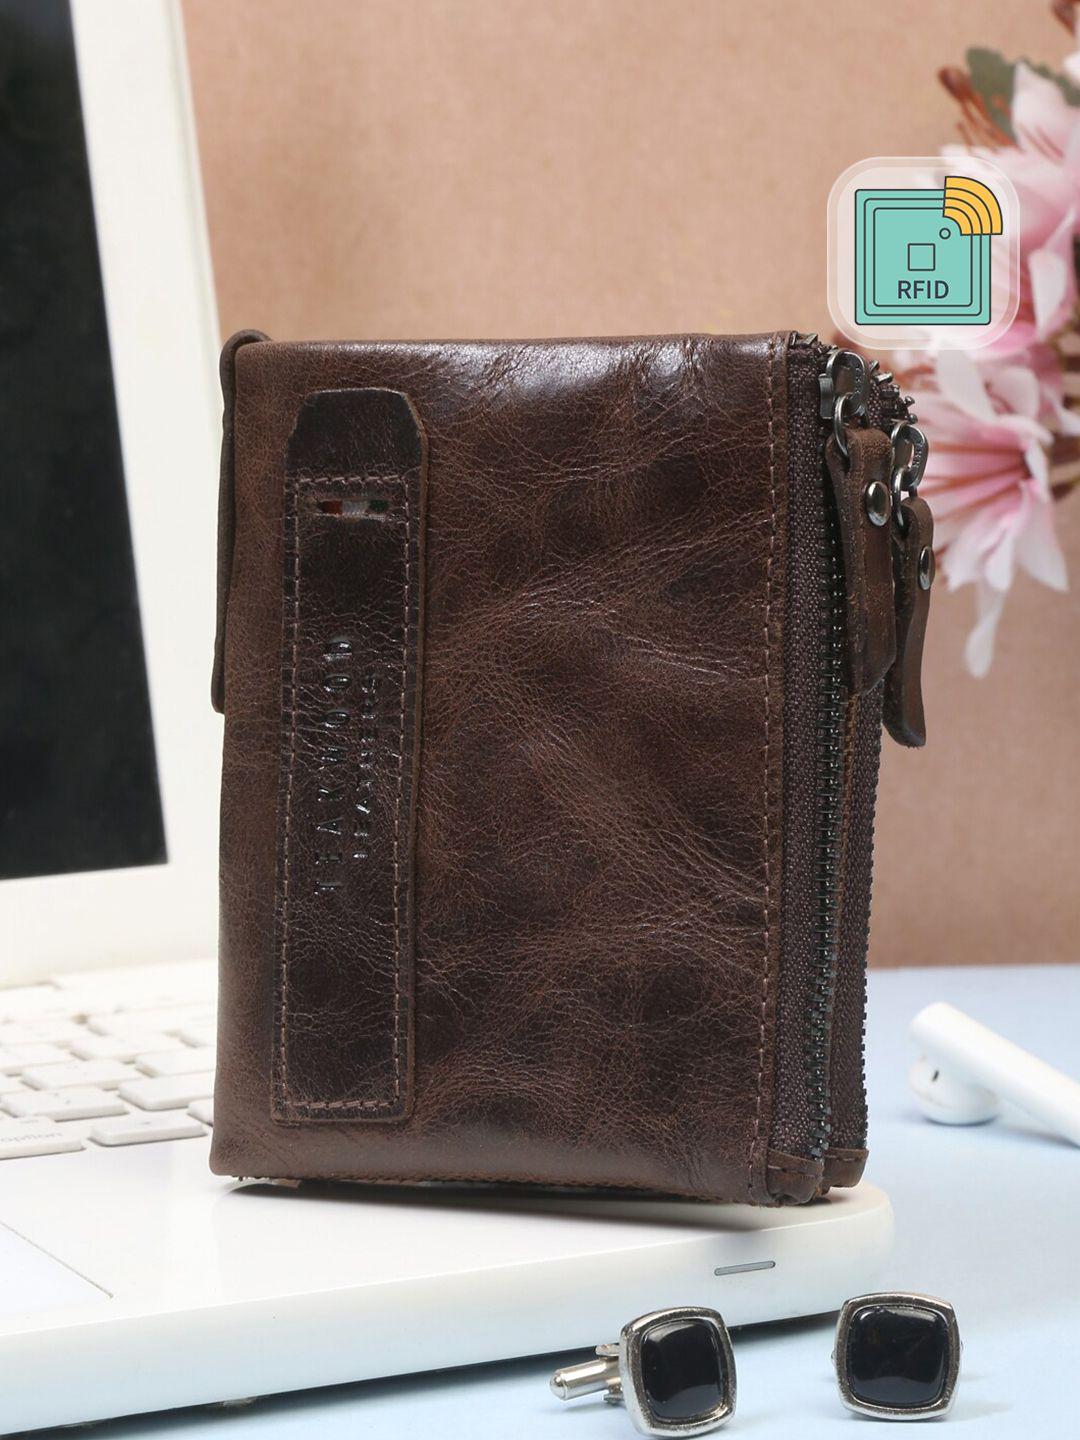 teakwood leathers unisex brown leather rfid protected  two fold wallet